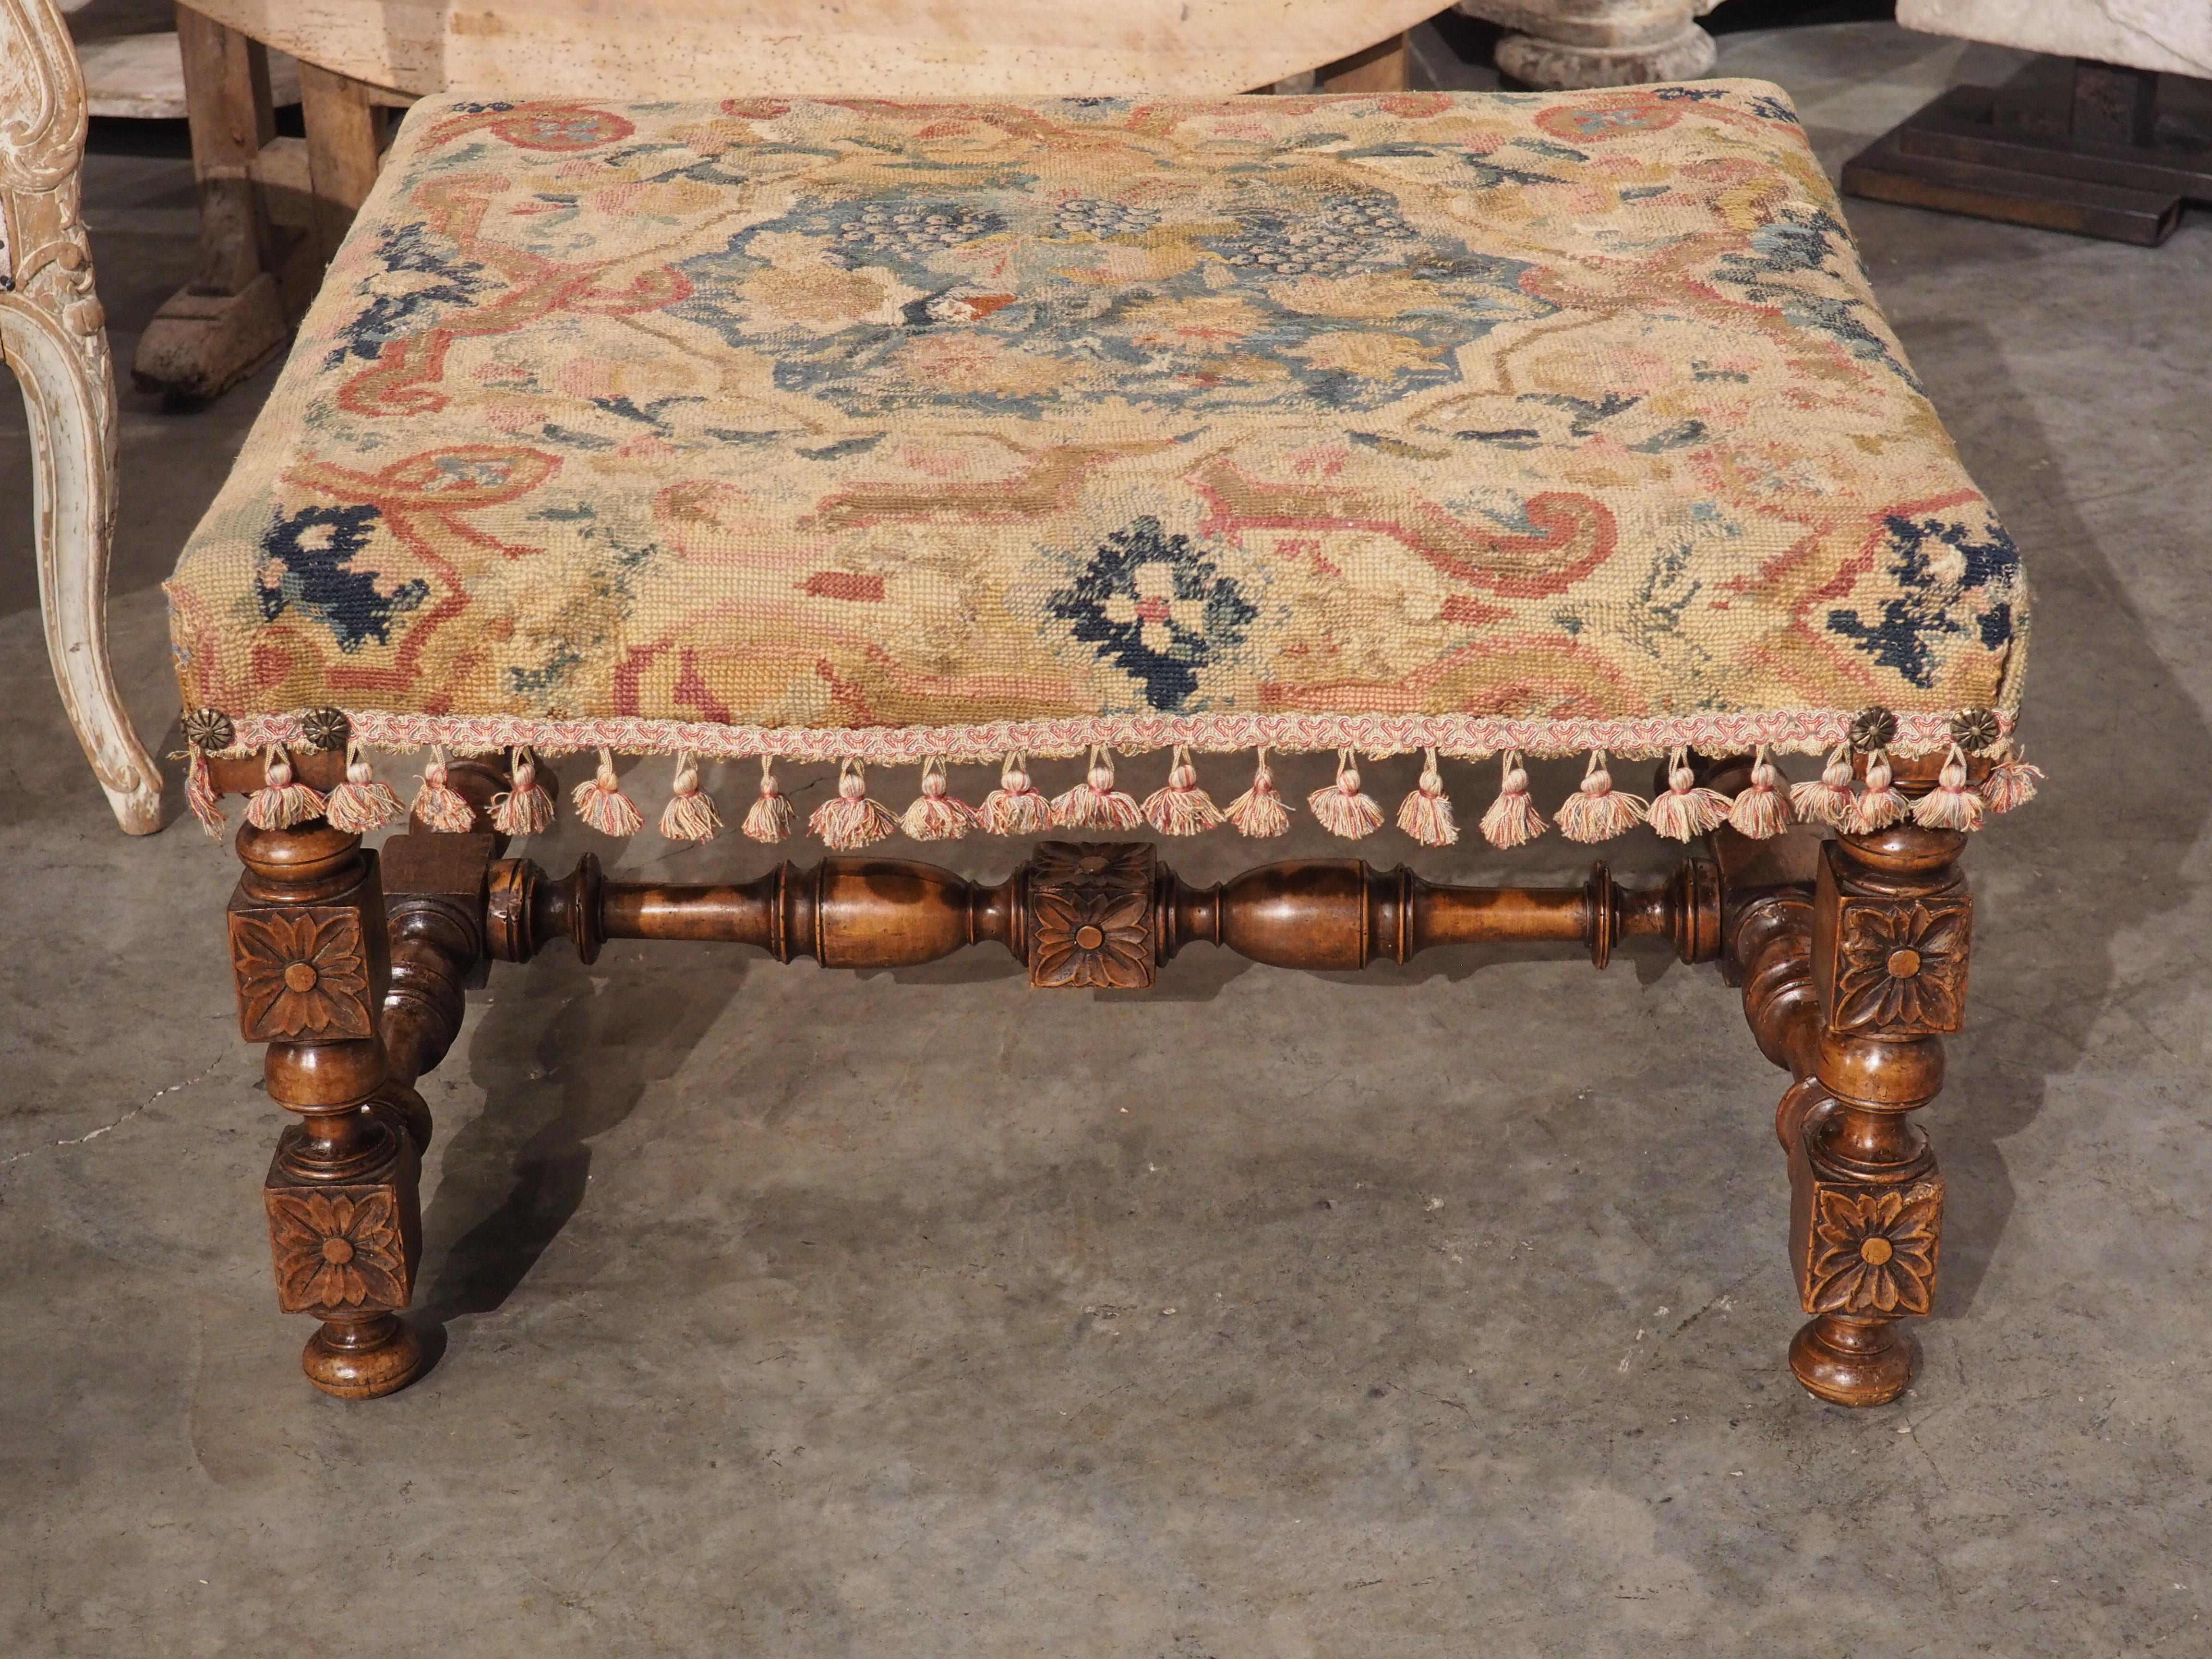 Metal Large Antique French Louis XIII Style Tabouret, Needlepoint Upholstery, C. 1870